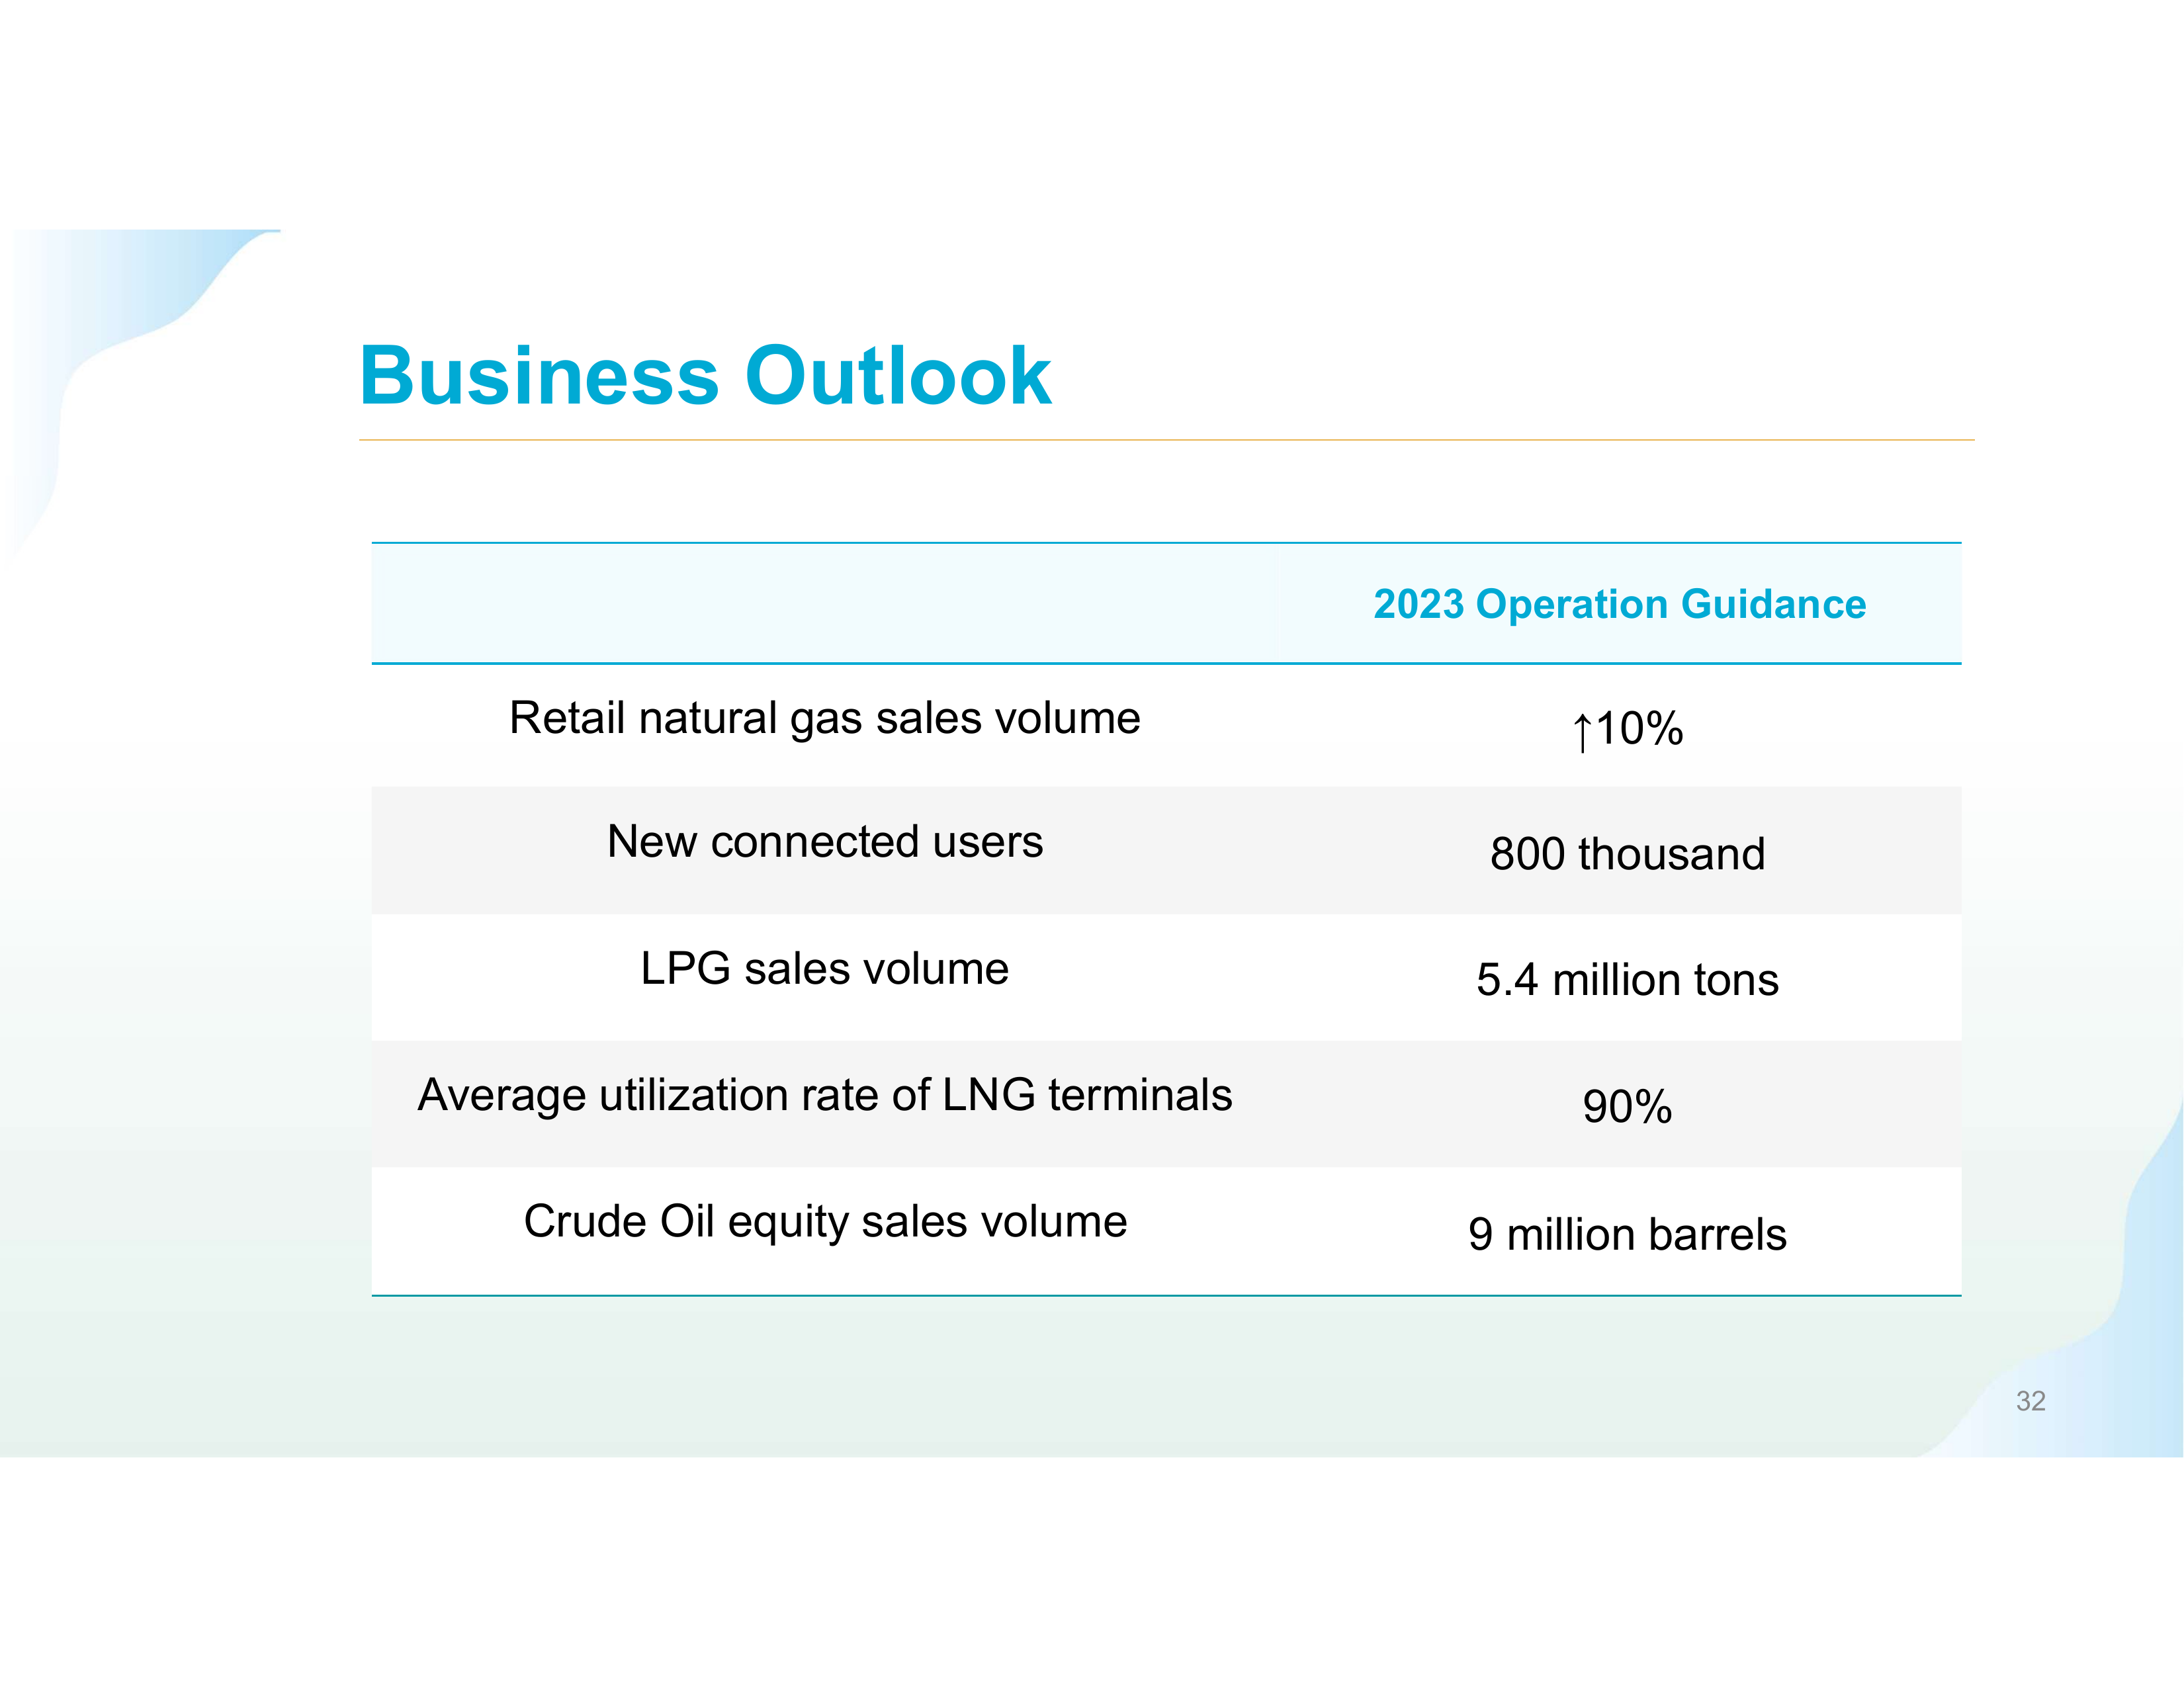 Business Outlook 

R